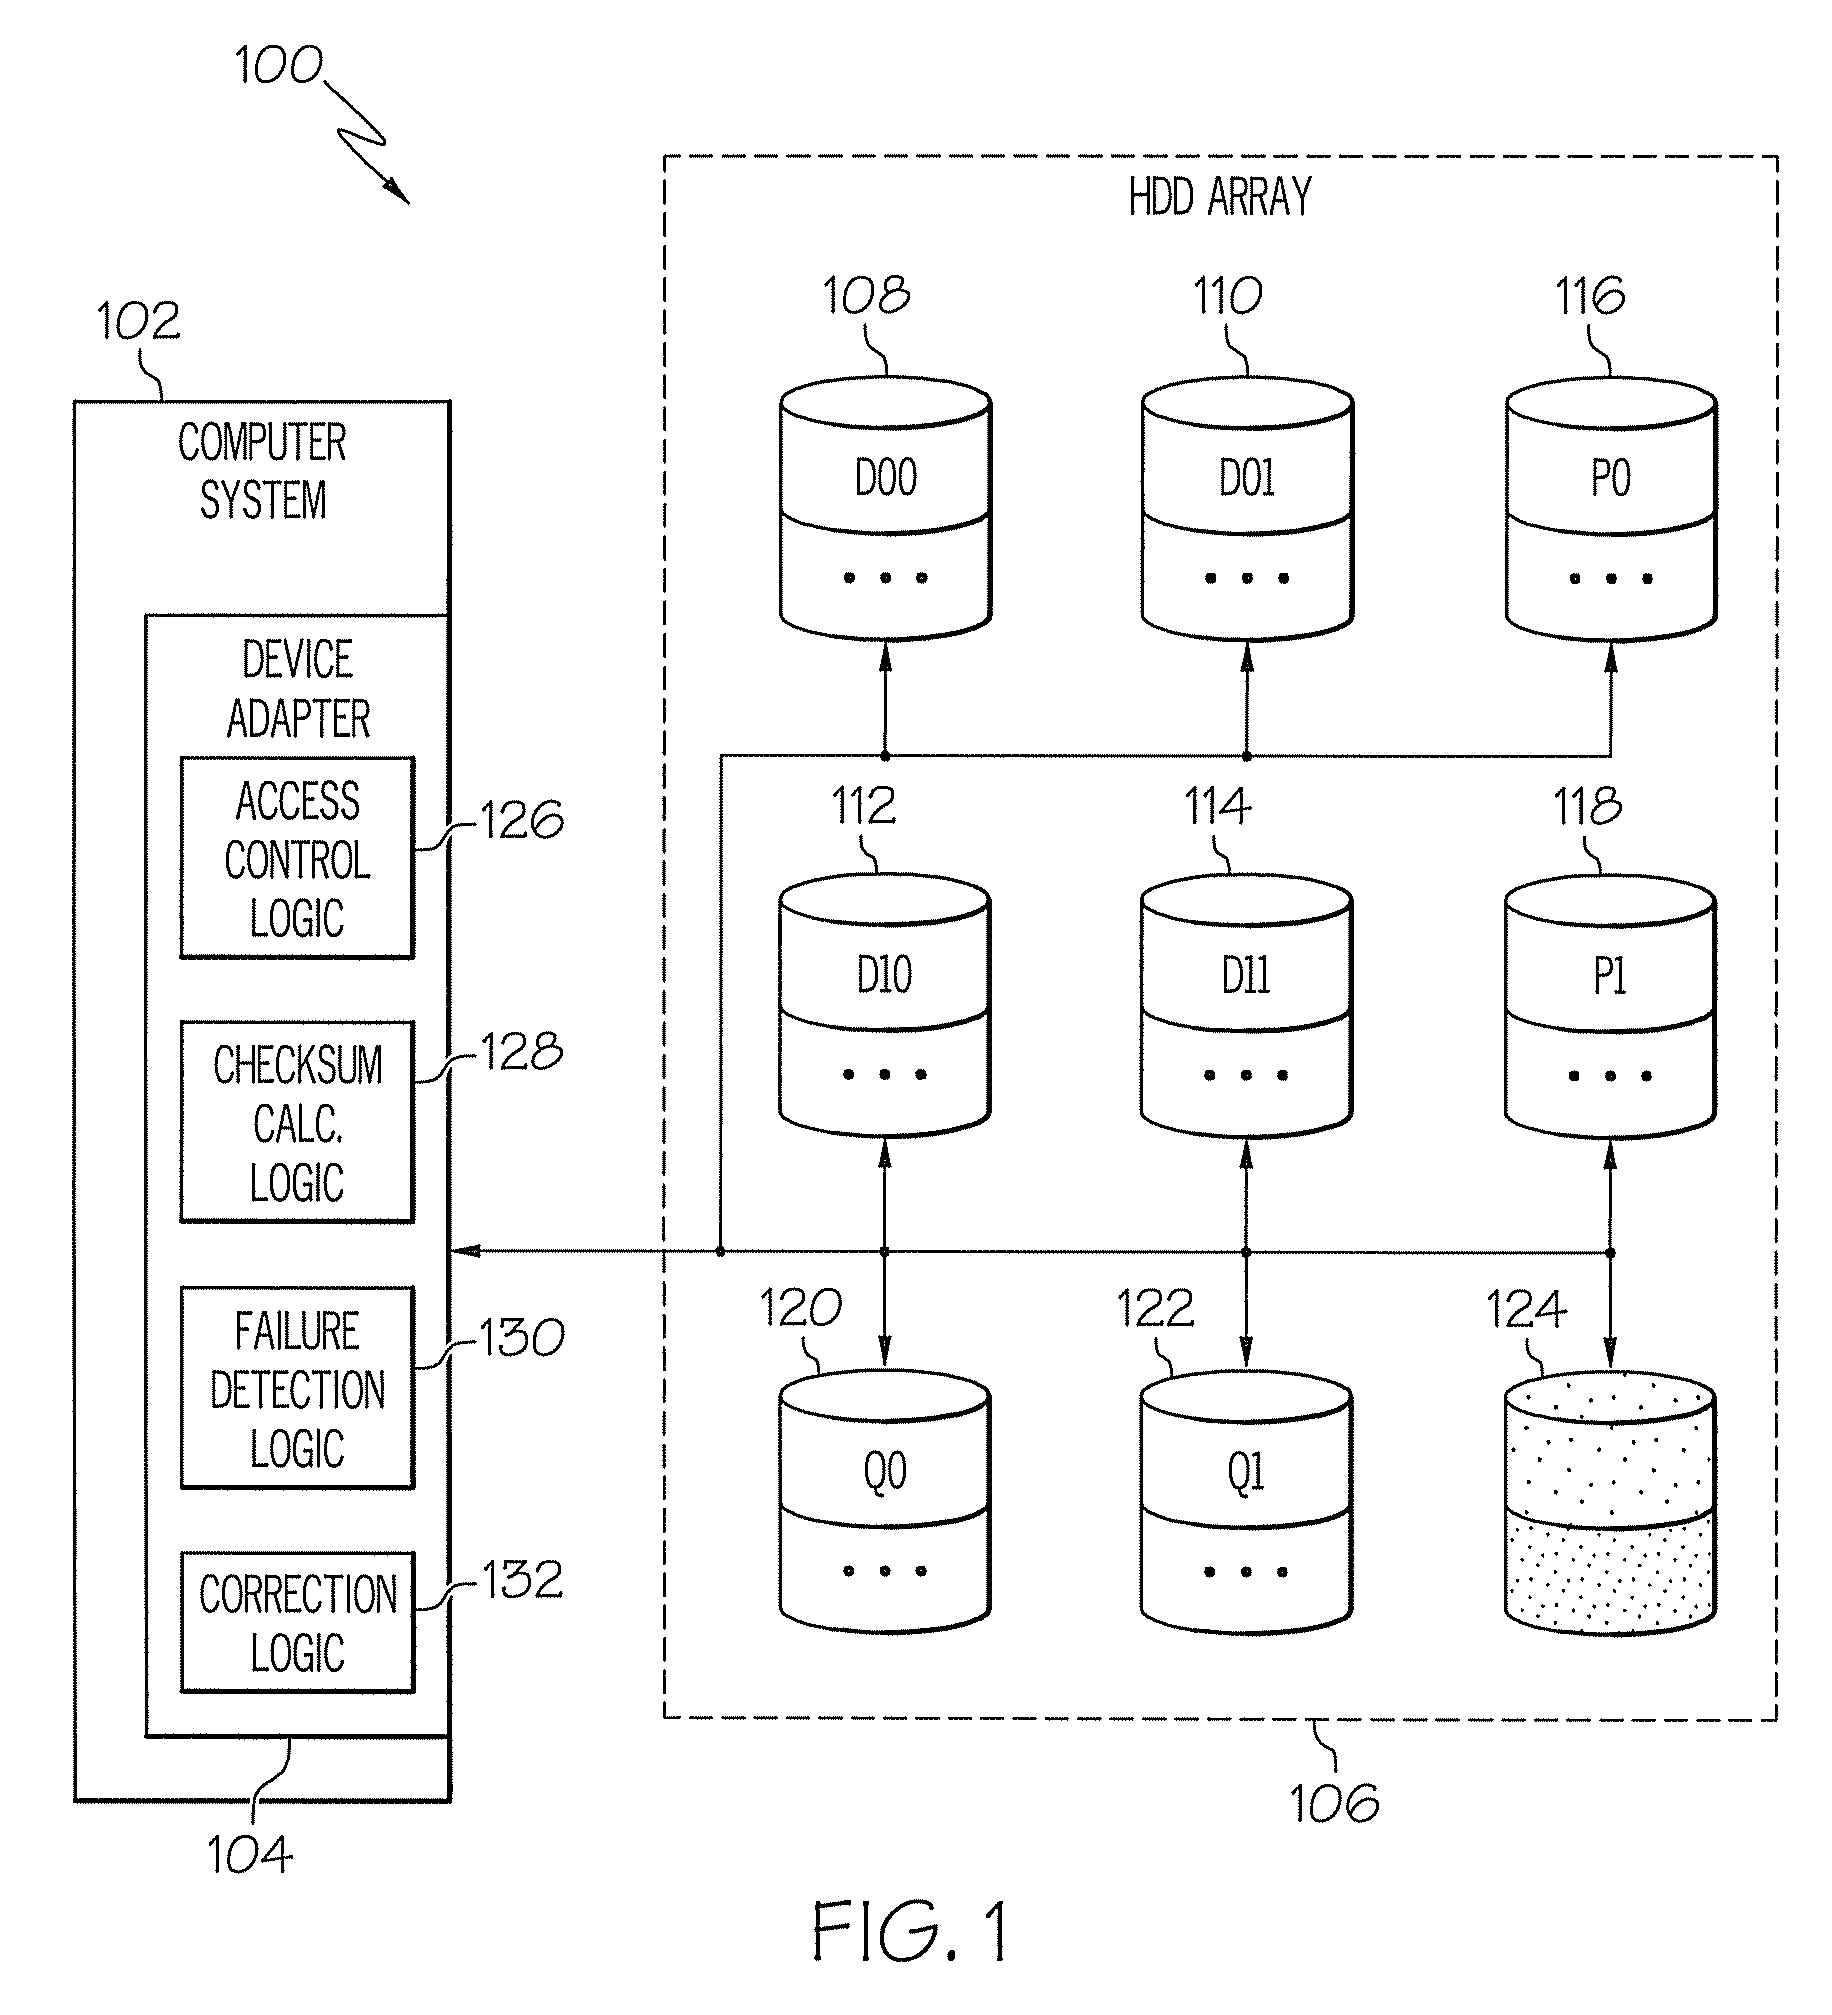 Providing enhanced tolerance of data loss in a disk array system